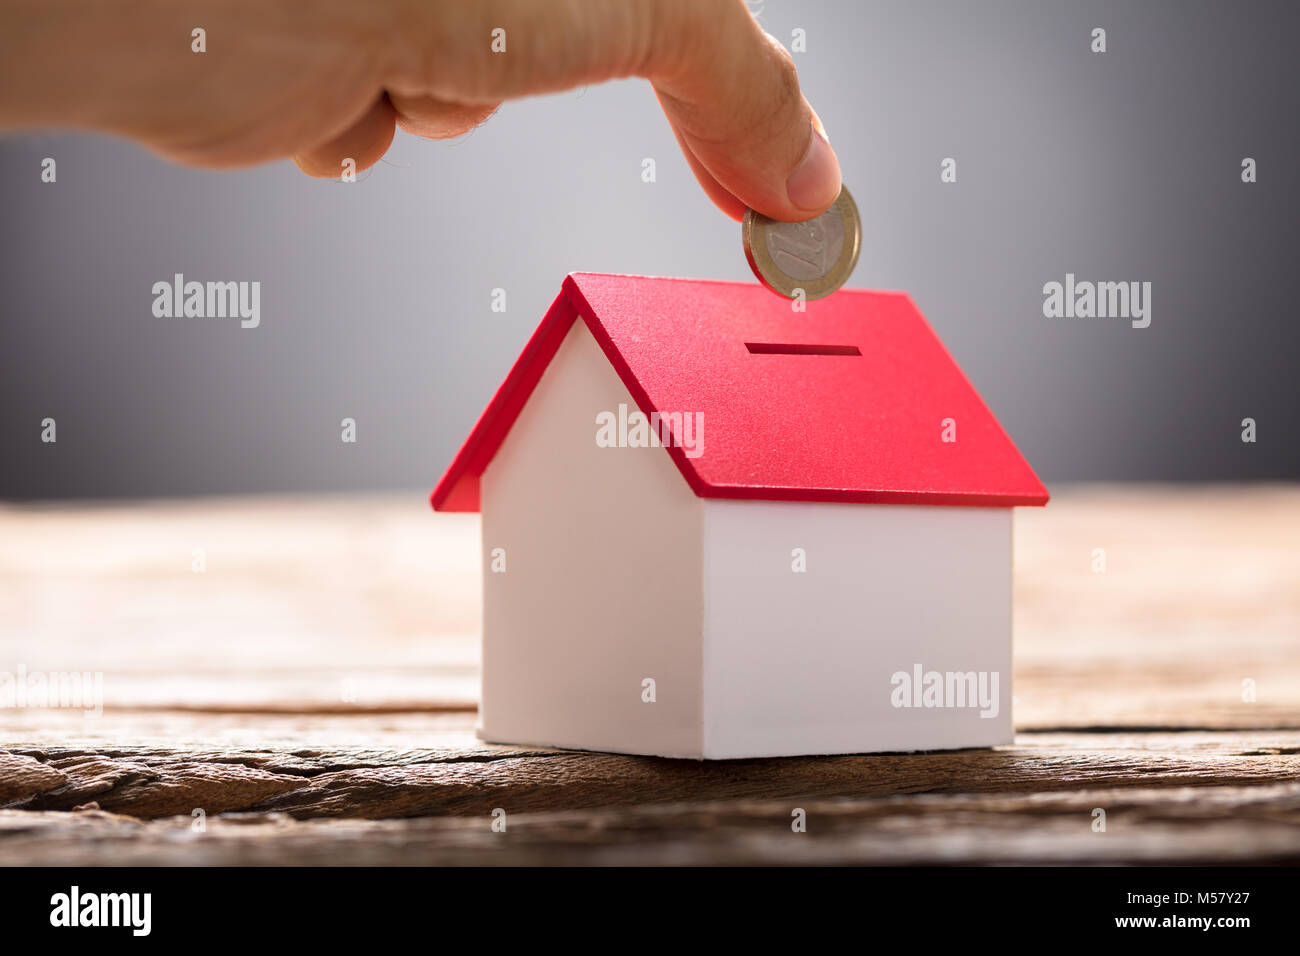 Closeup of hand putting coin in house piggy bank on wood Stock Photo